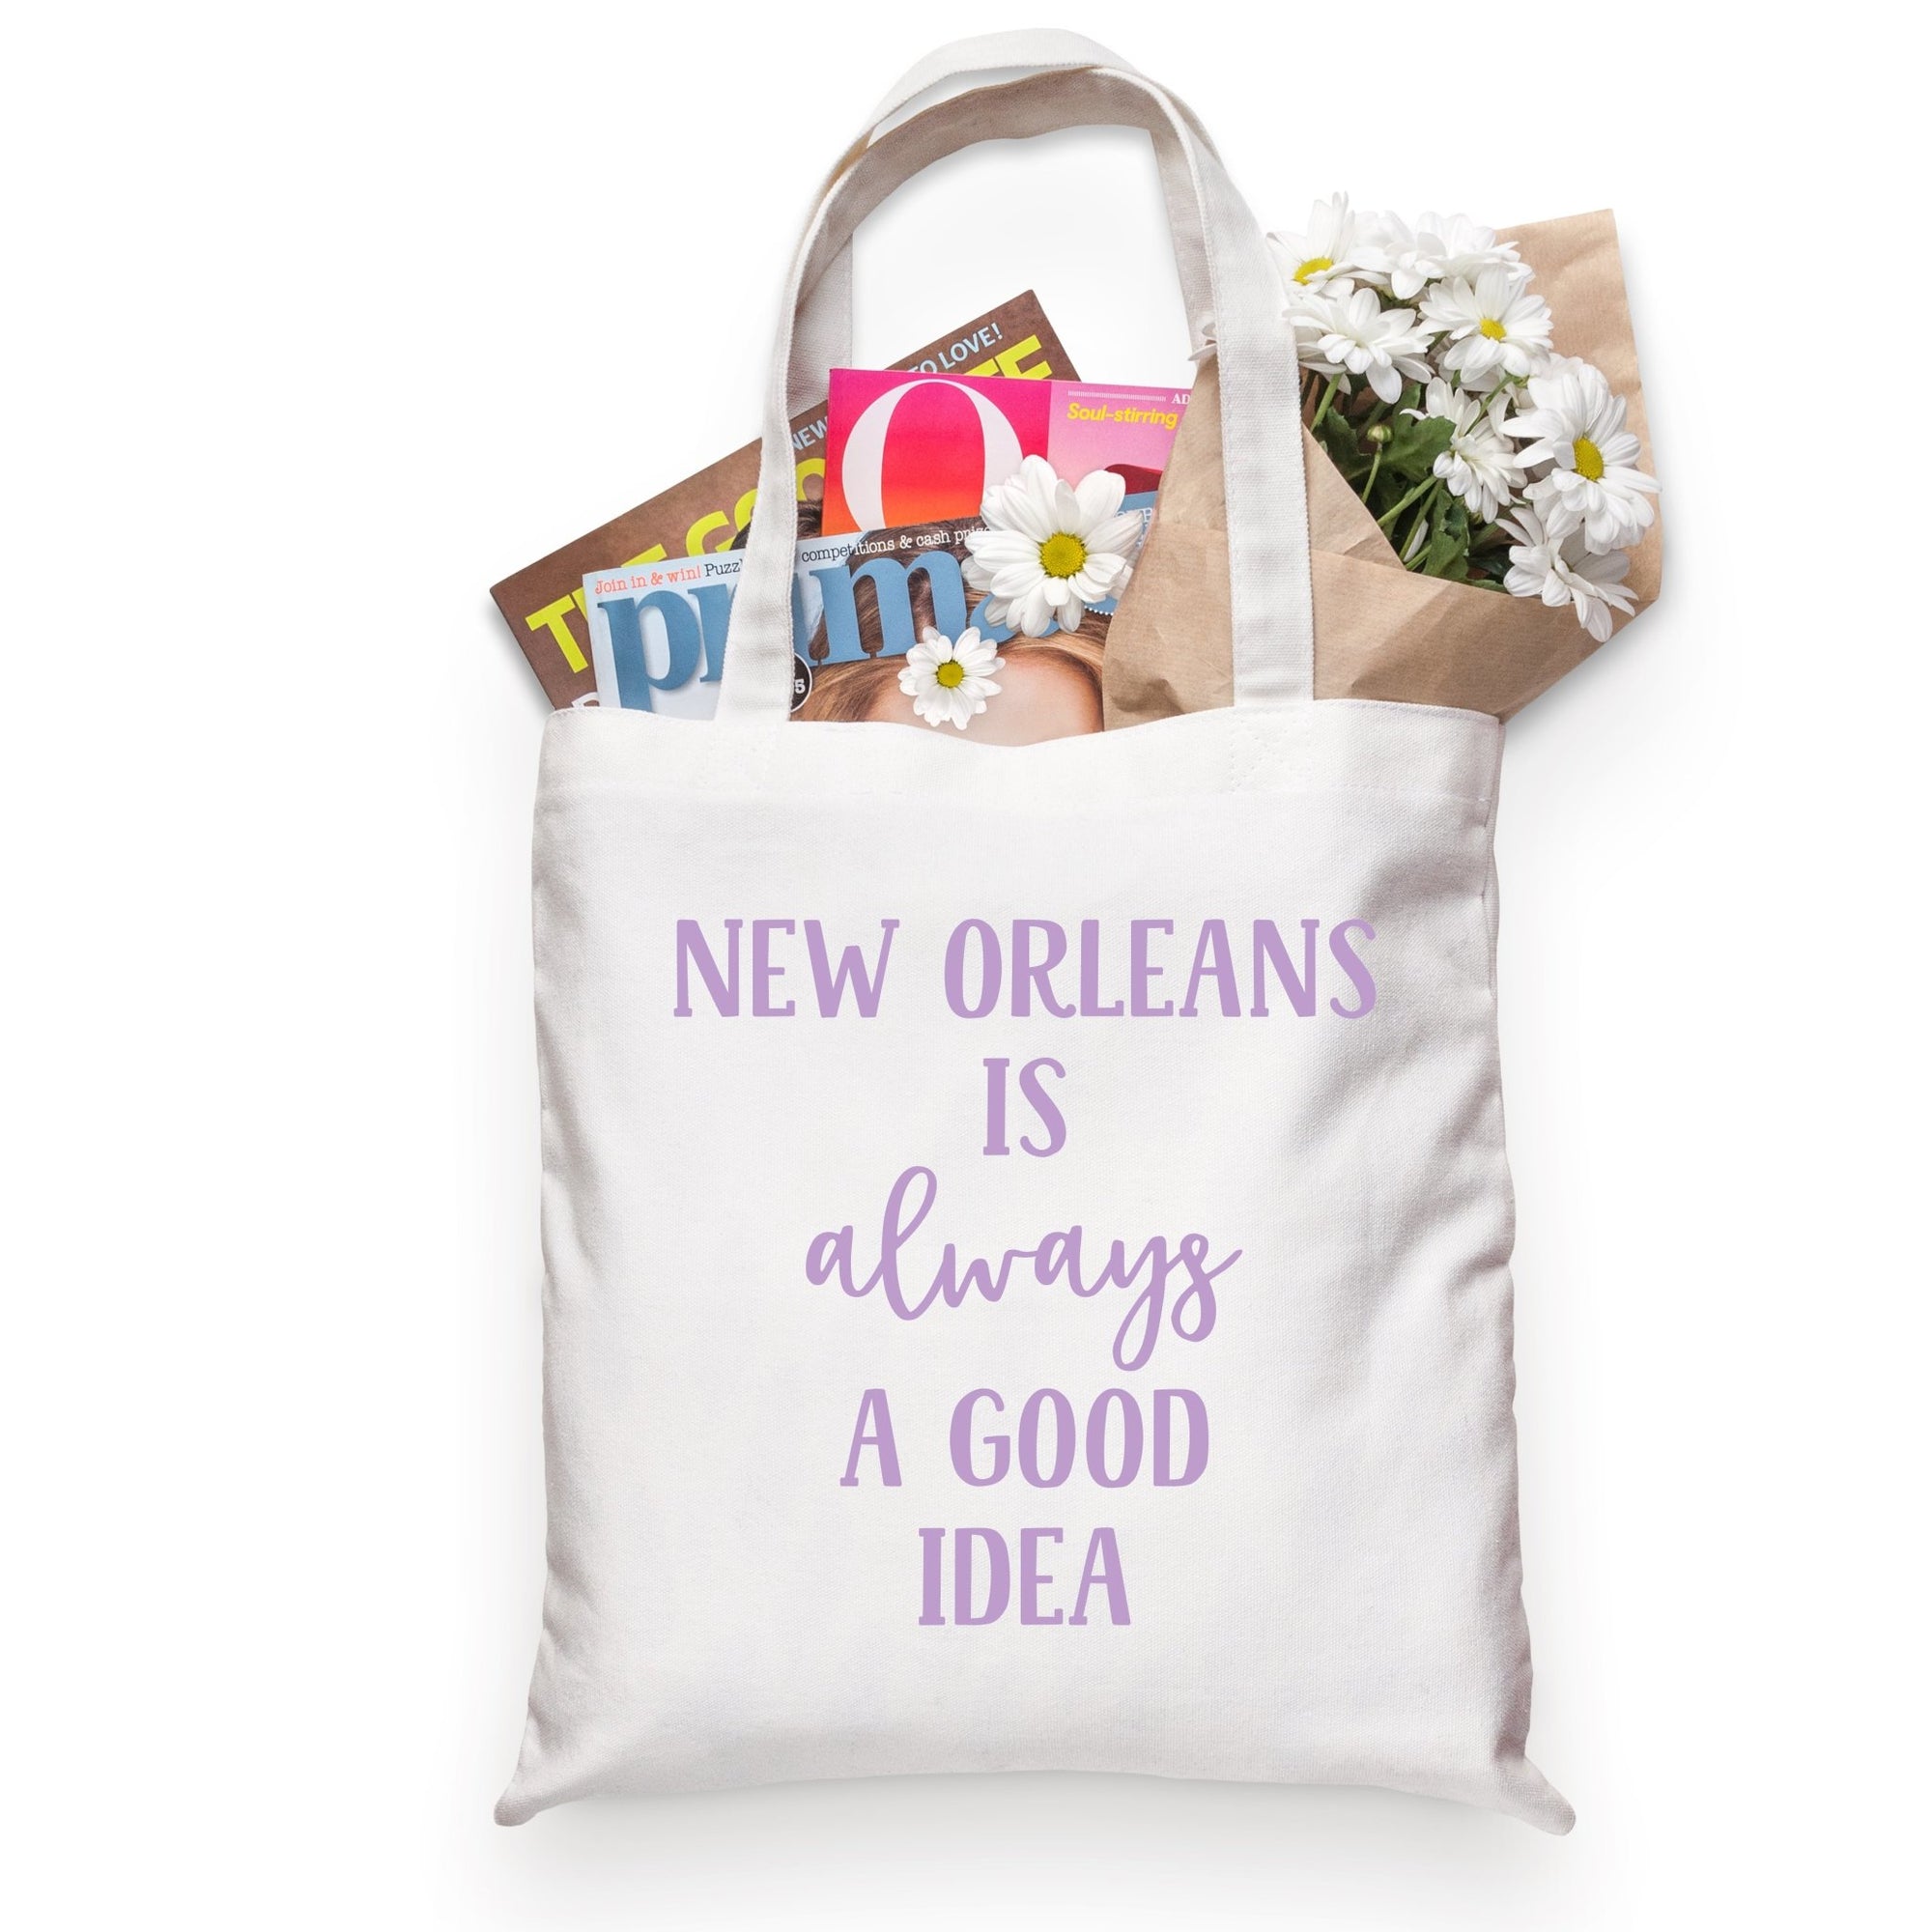 A cotton tote is customized with purple text that reads "New Orleans is always a good idea".